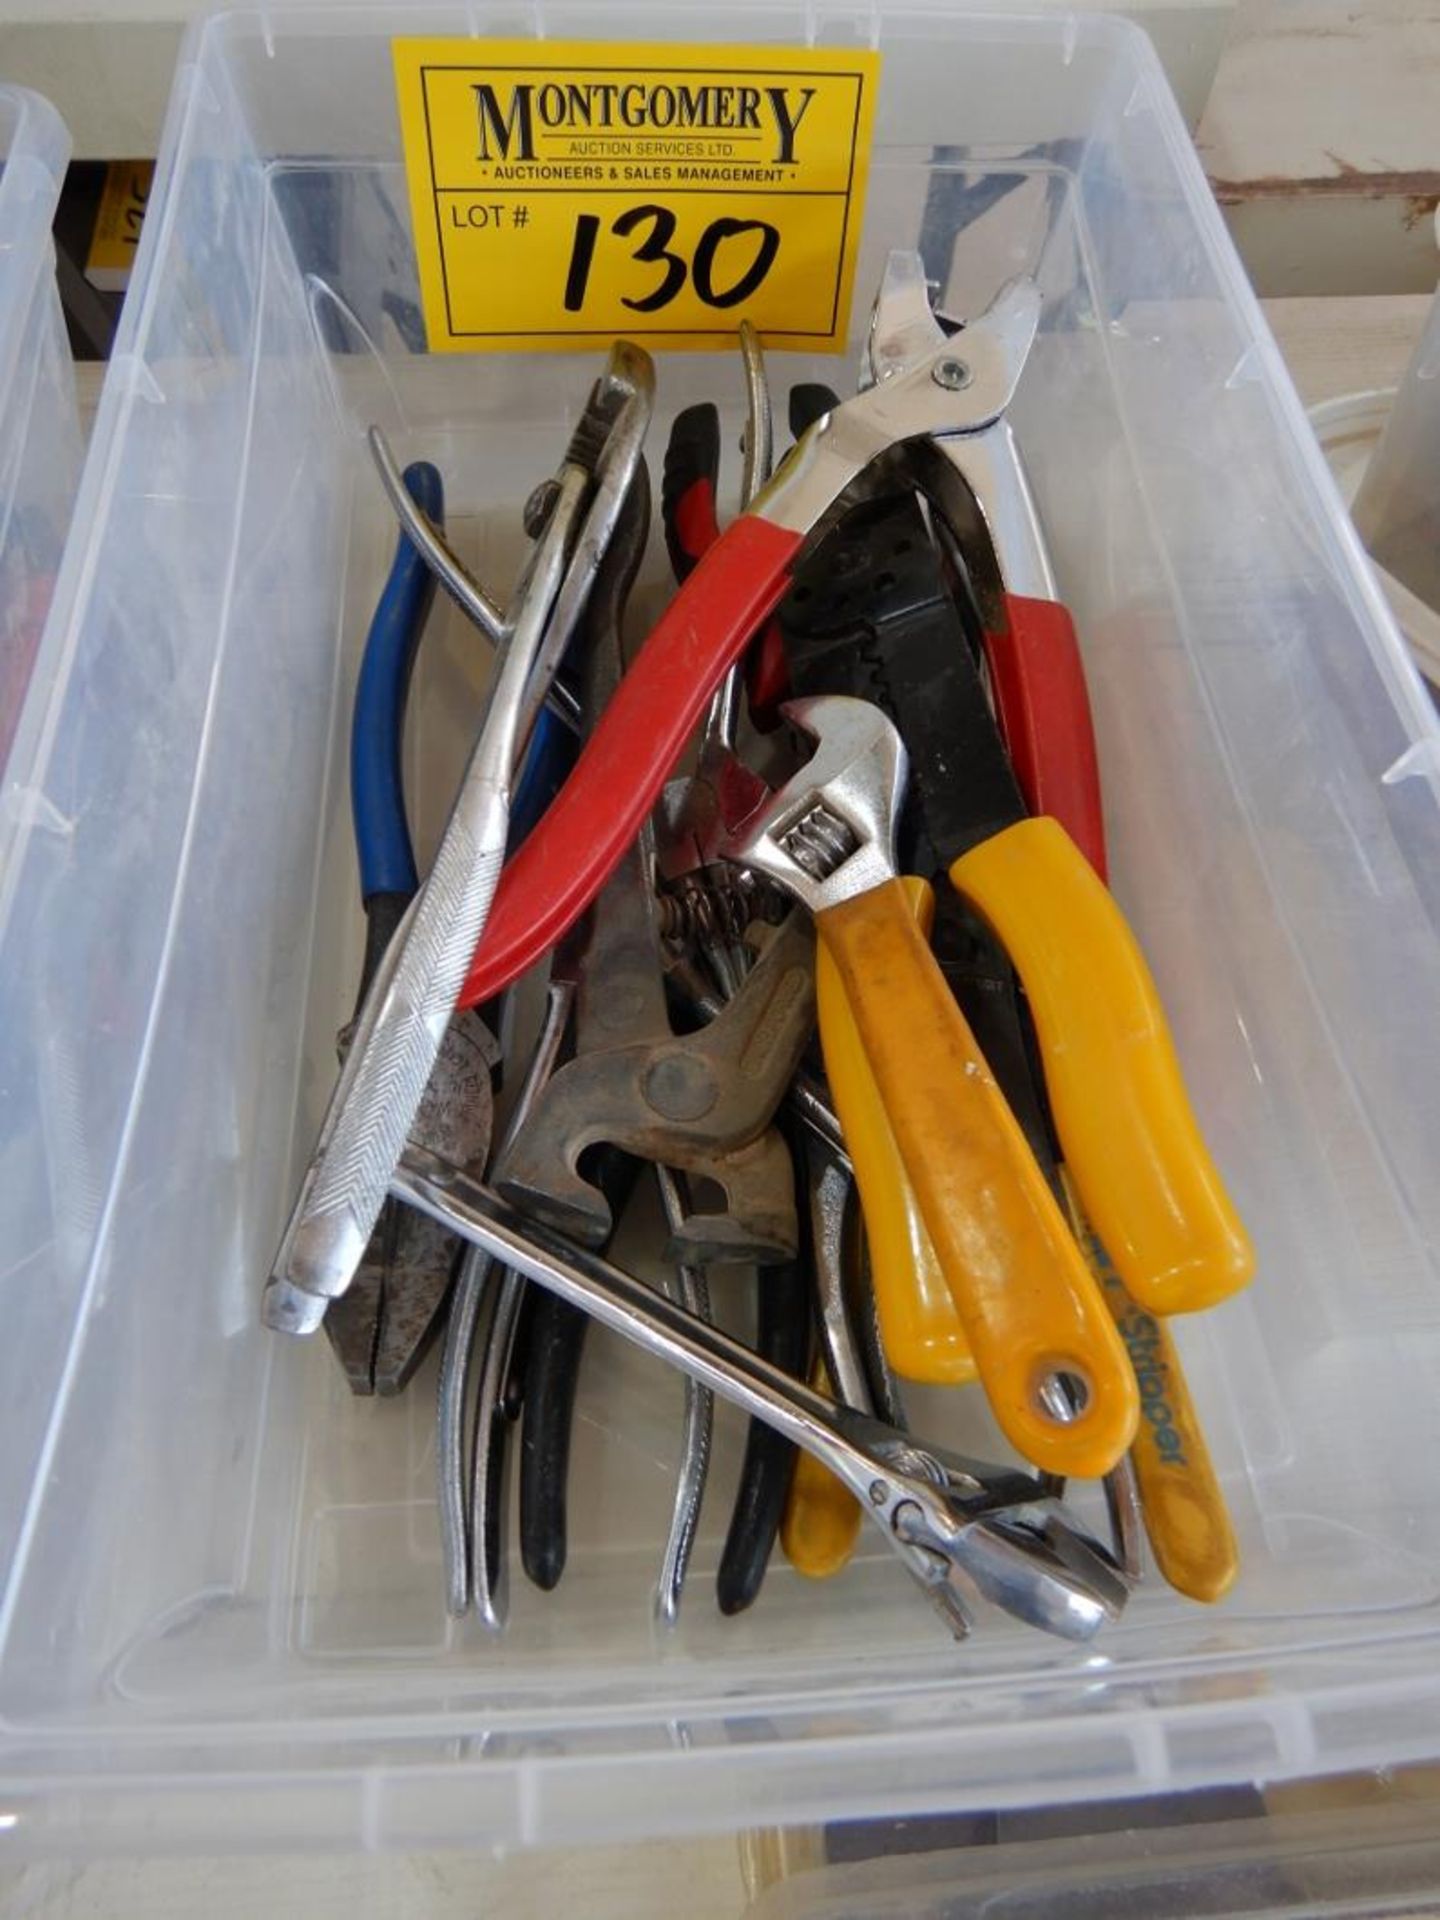 L/O CRIMPERS, WIRE STRIPPERS, ASSORTED TOOLS